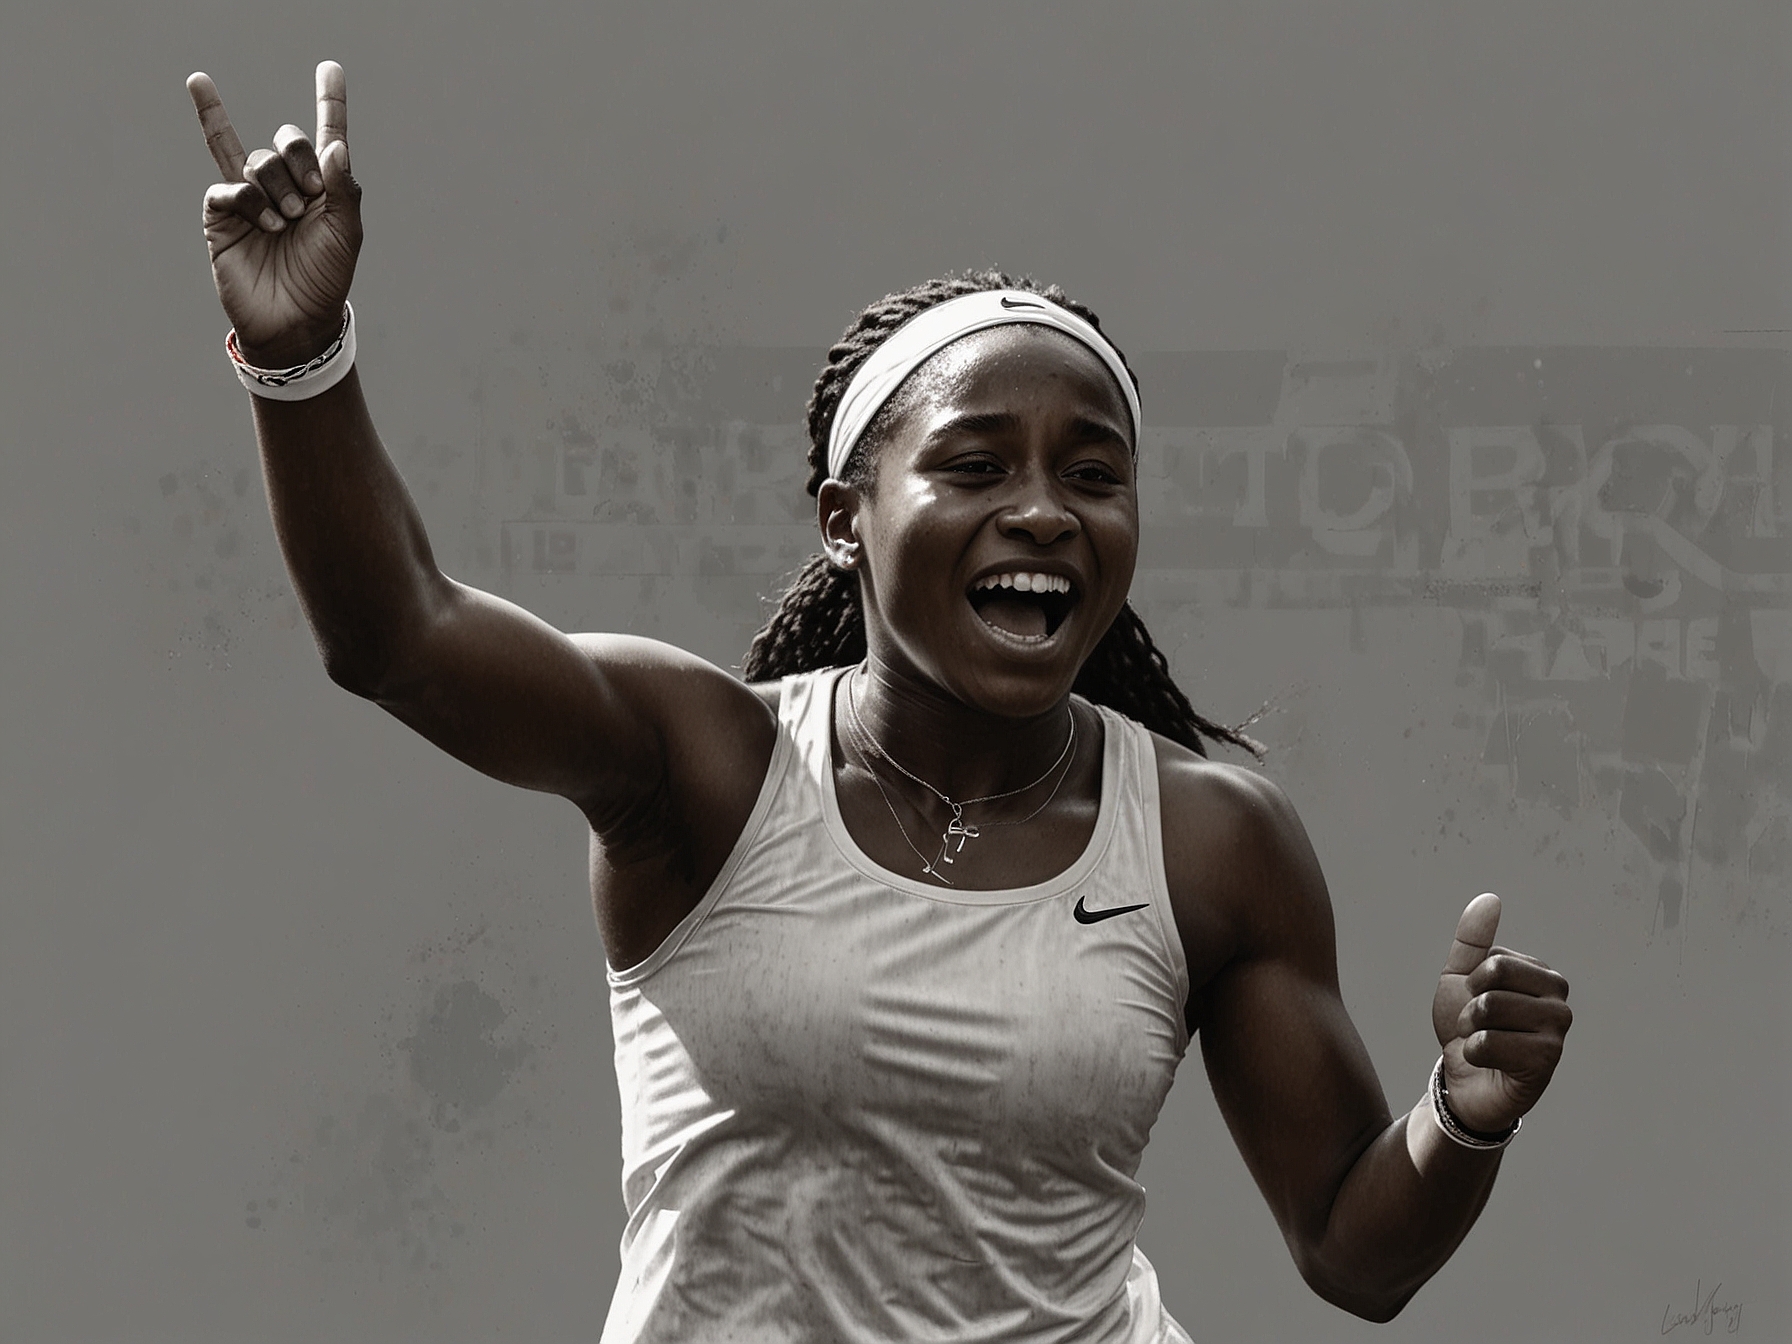 Coco Gauff celebrates her victory with a composed and confident demeanor, reflecting her mental toughness and readiness to advance further in the Wimbledon tournament.